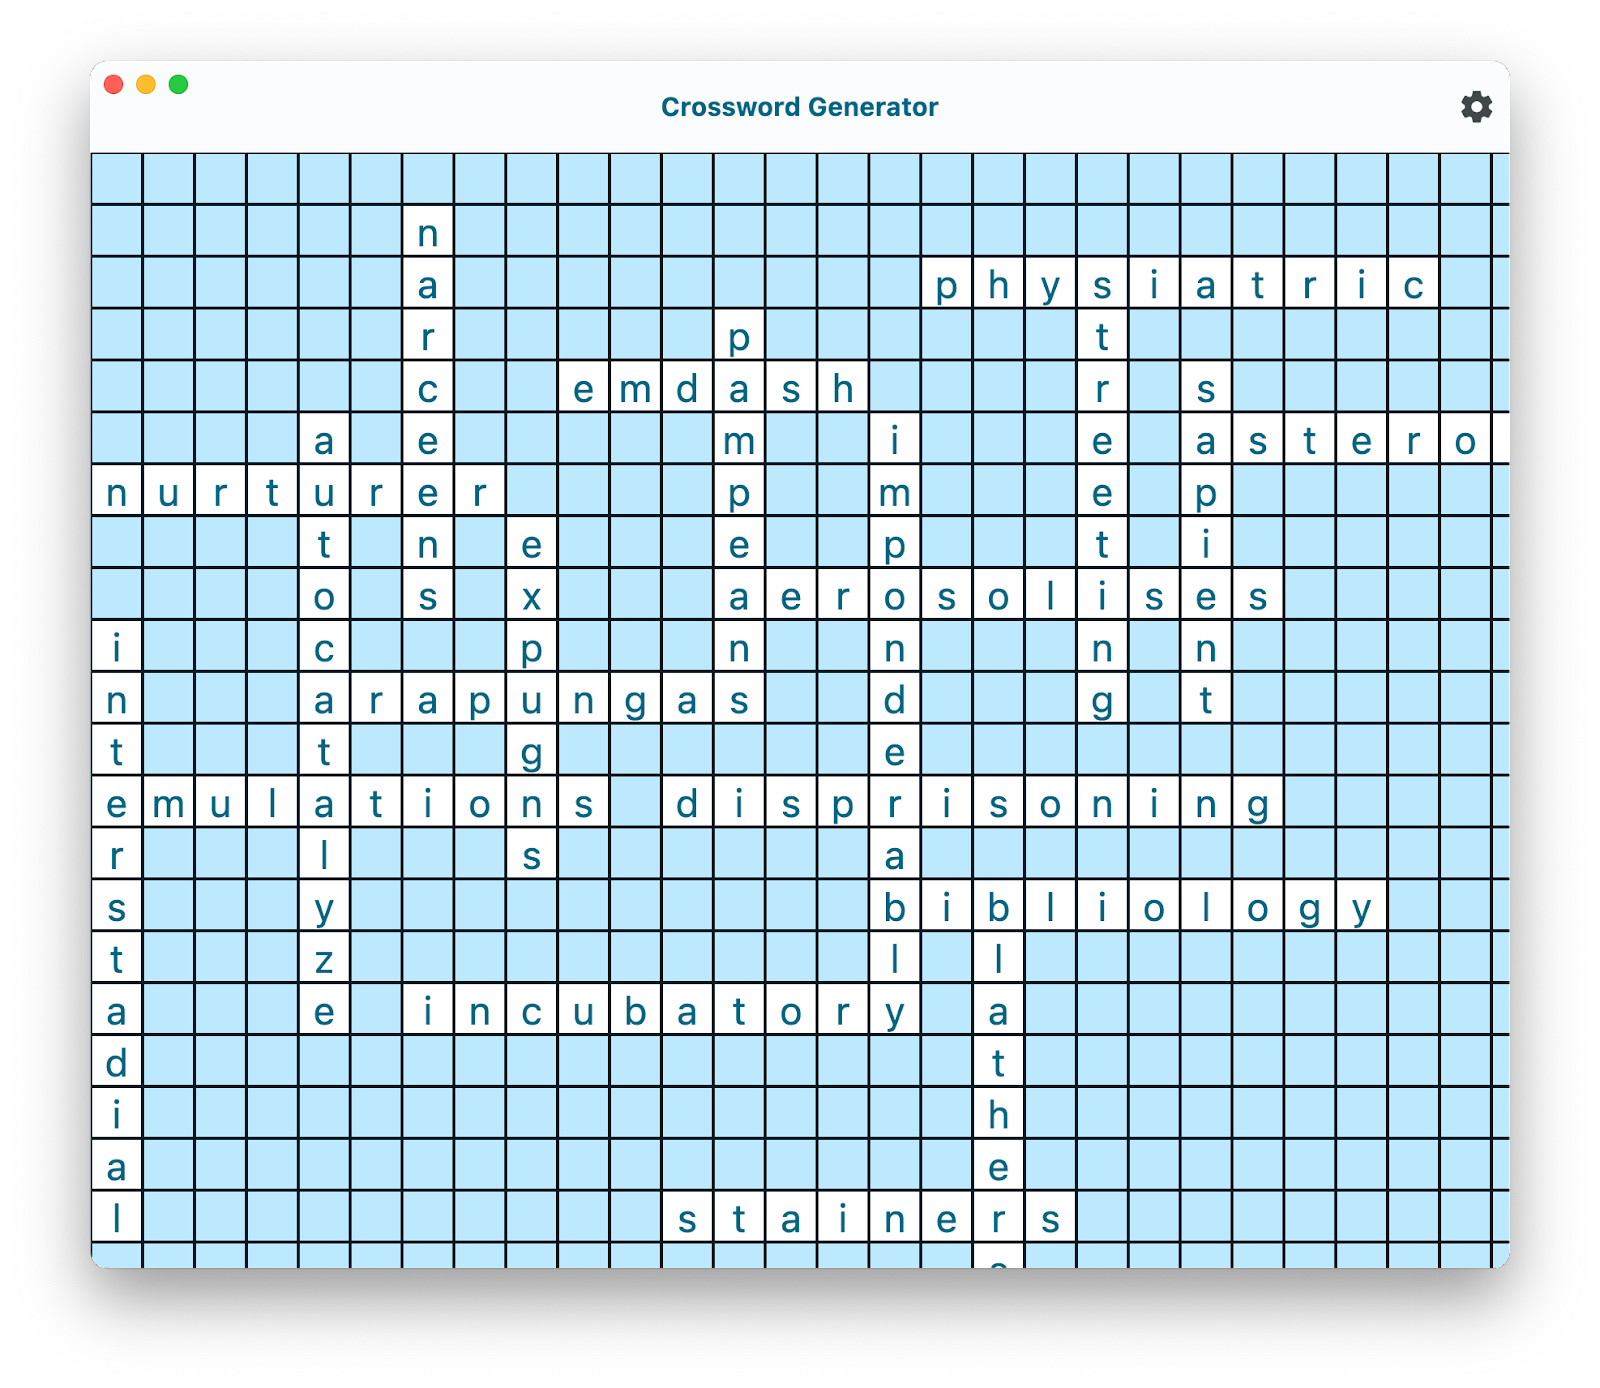 Crossword Generator app window with words laid out across and down, intersecting at random points